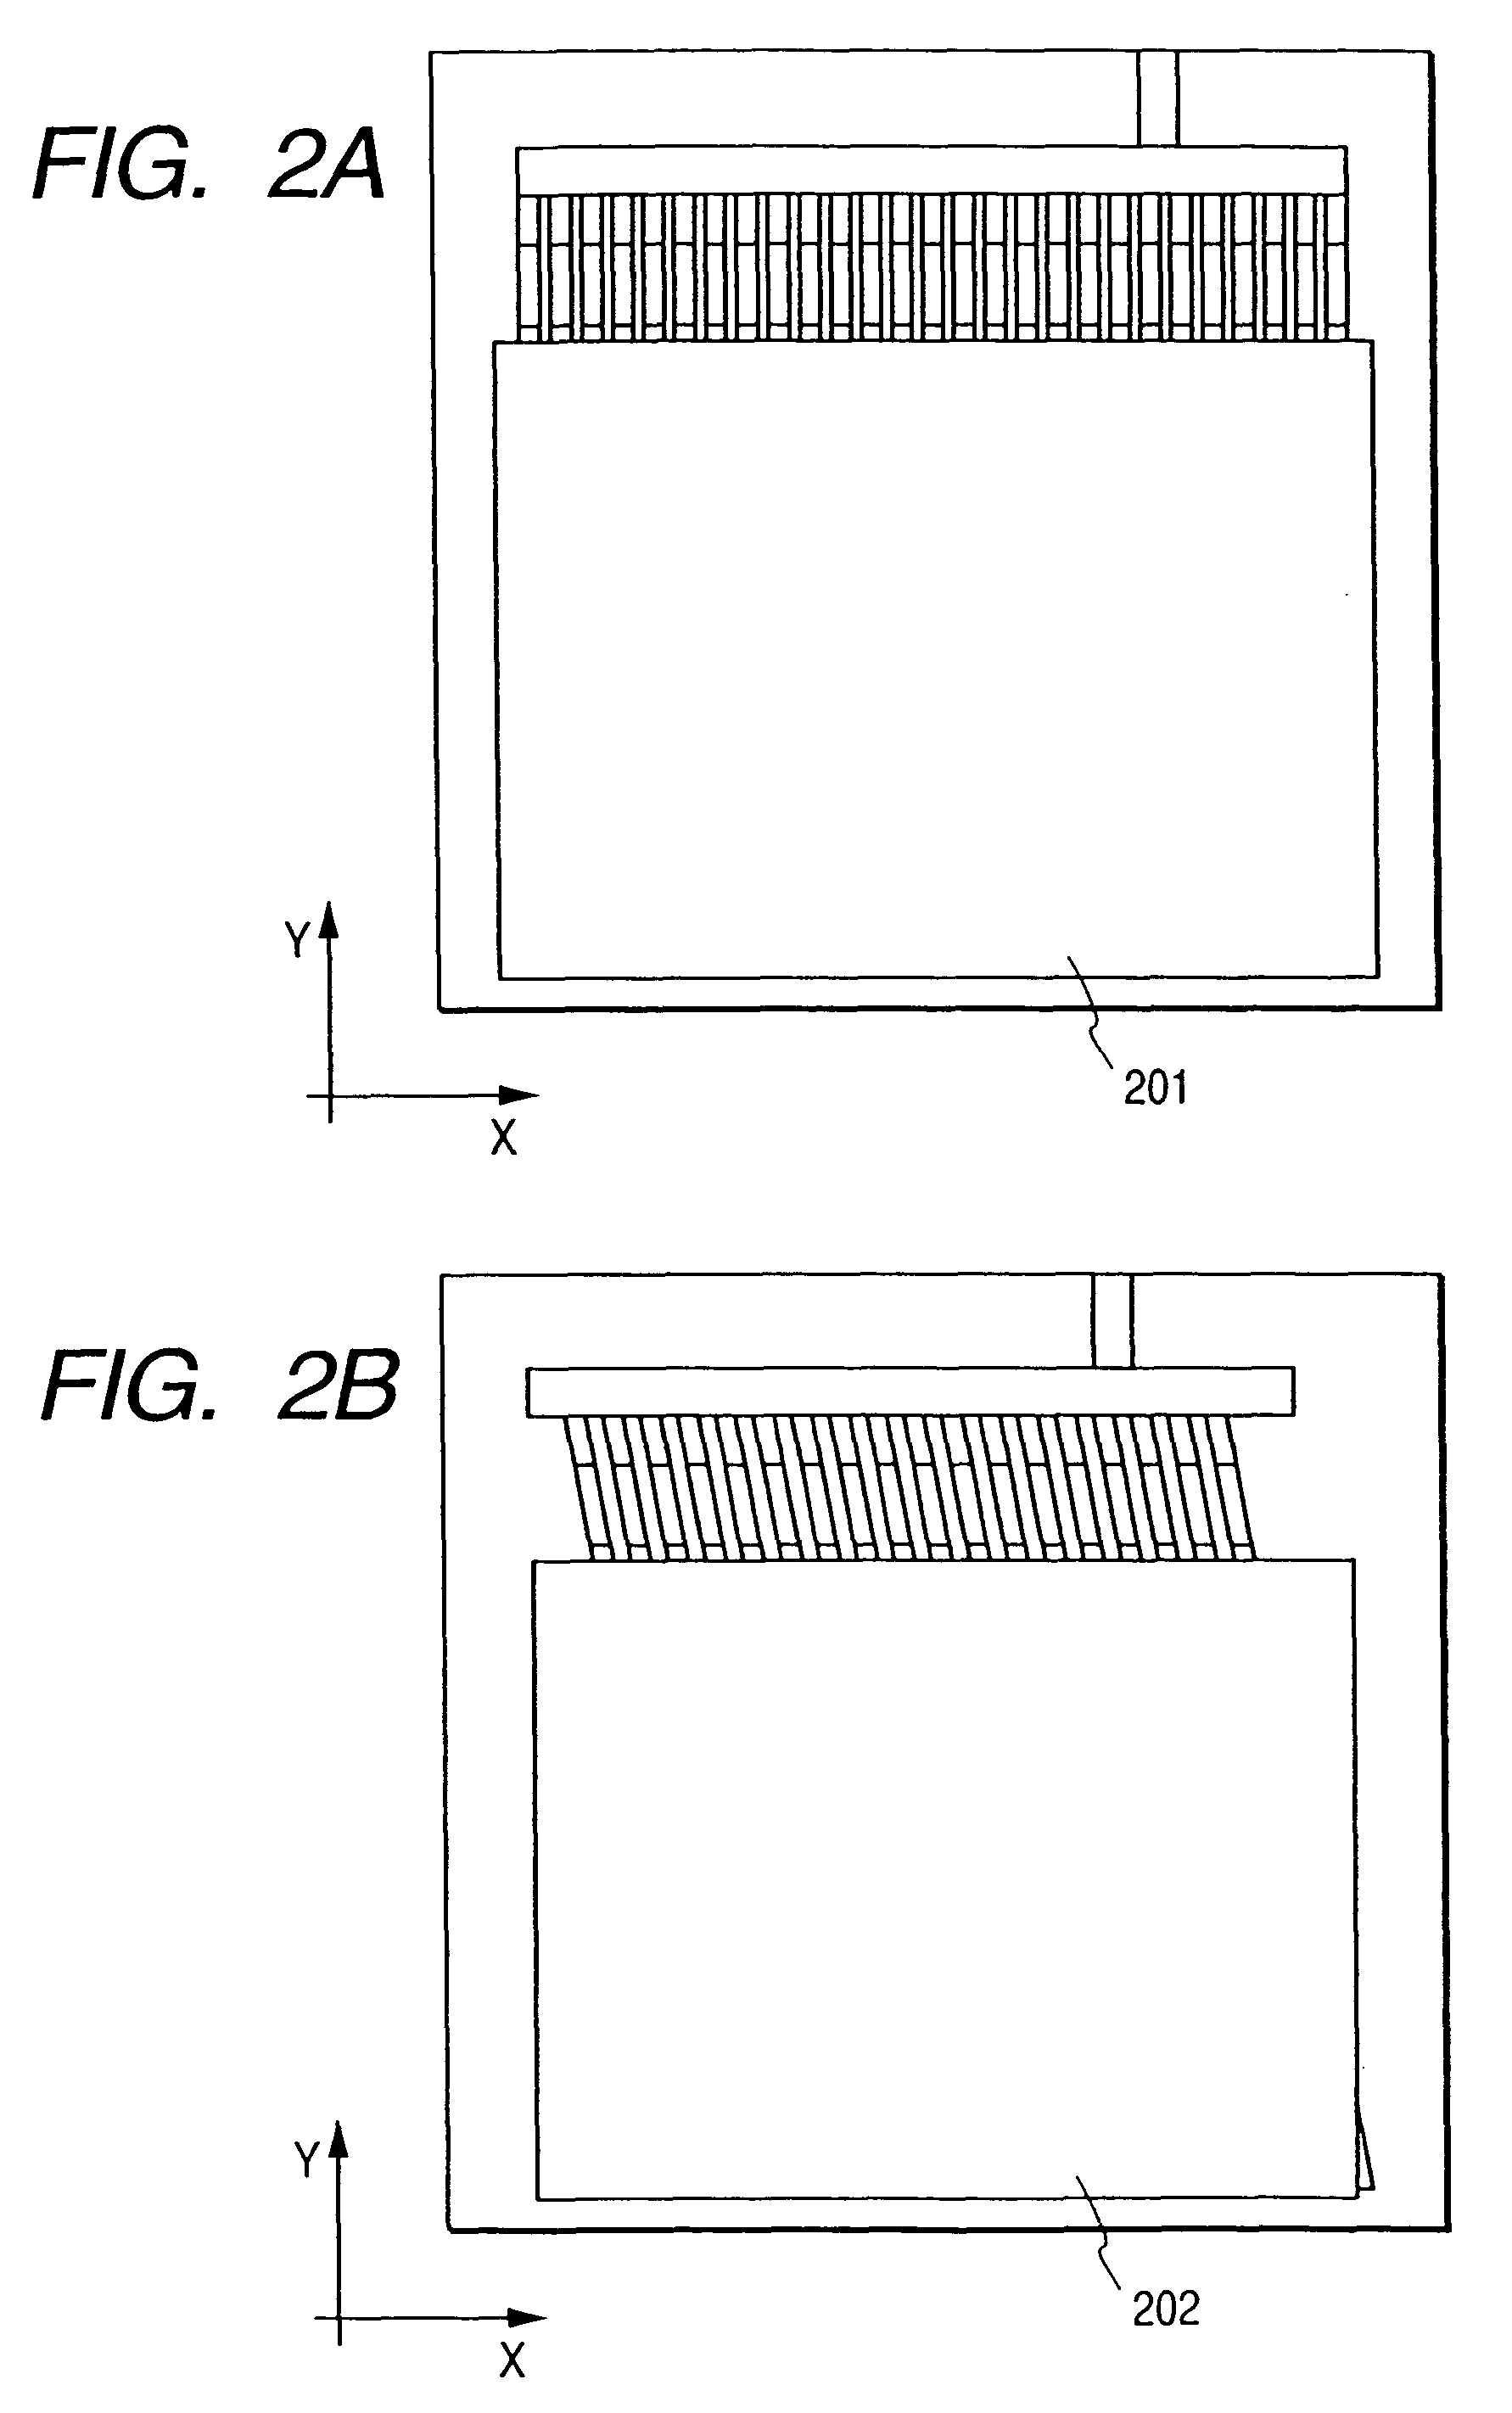 Electron emission apparatus comprising electron-emitting devices, image forming apparatus and voltage application apparatus for applying voltage between electrodes